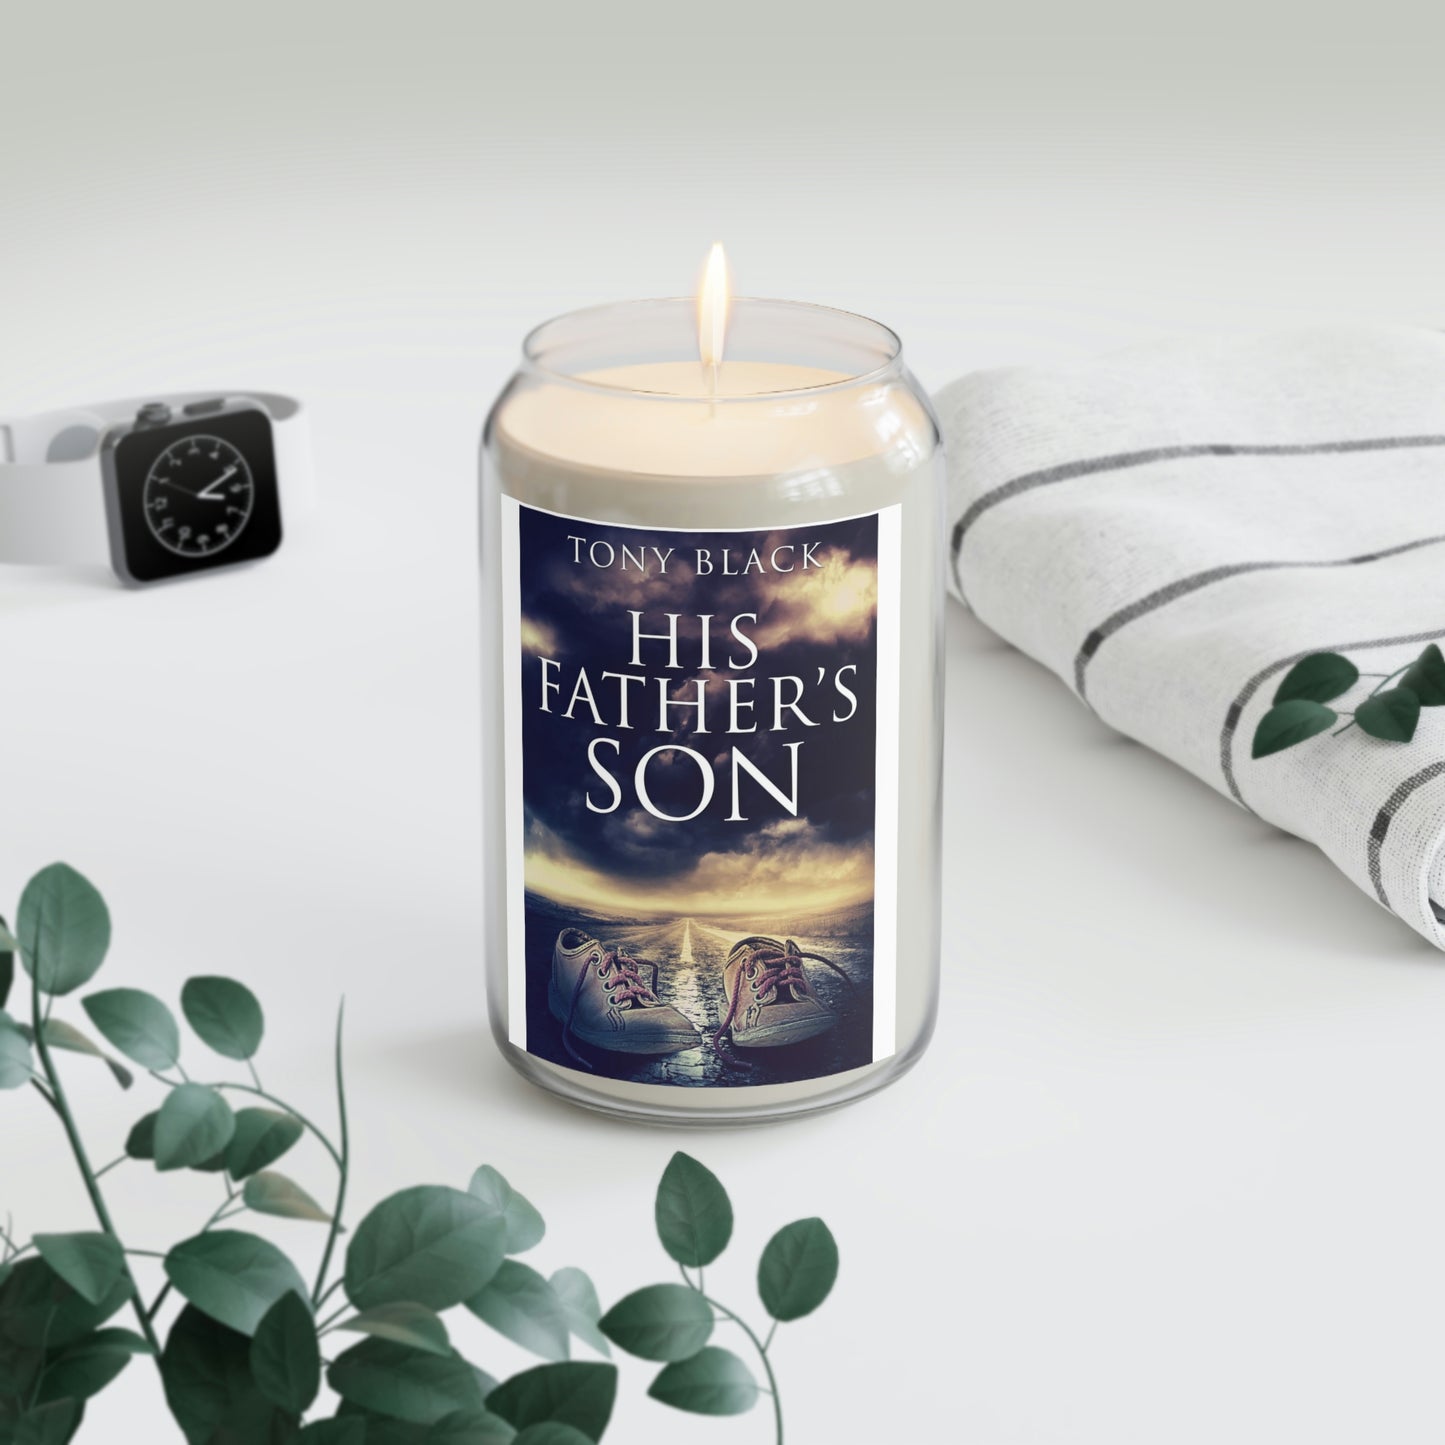 His Father's Son - Scented Candle